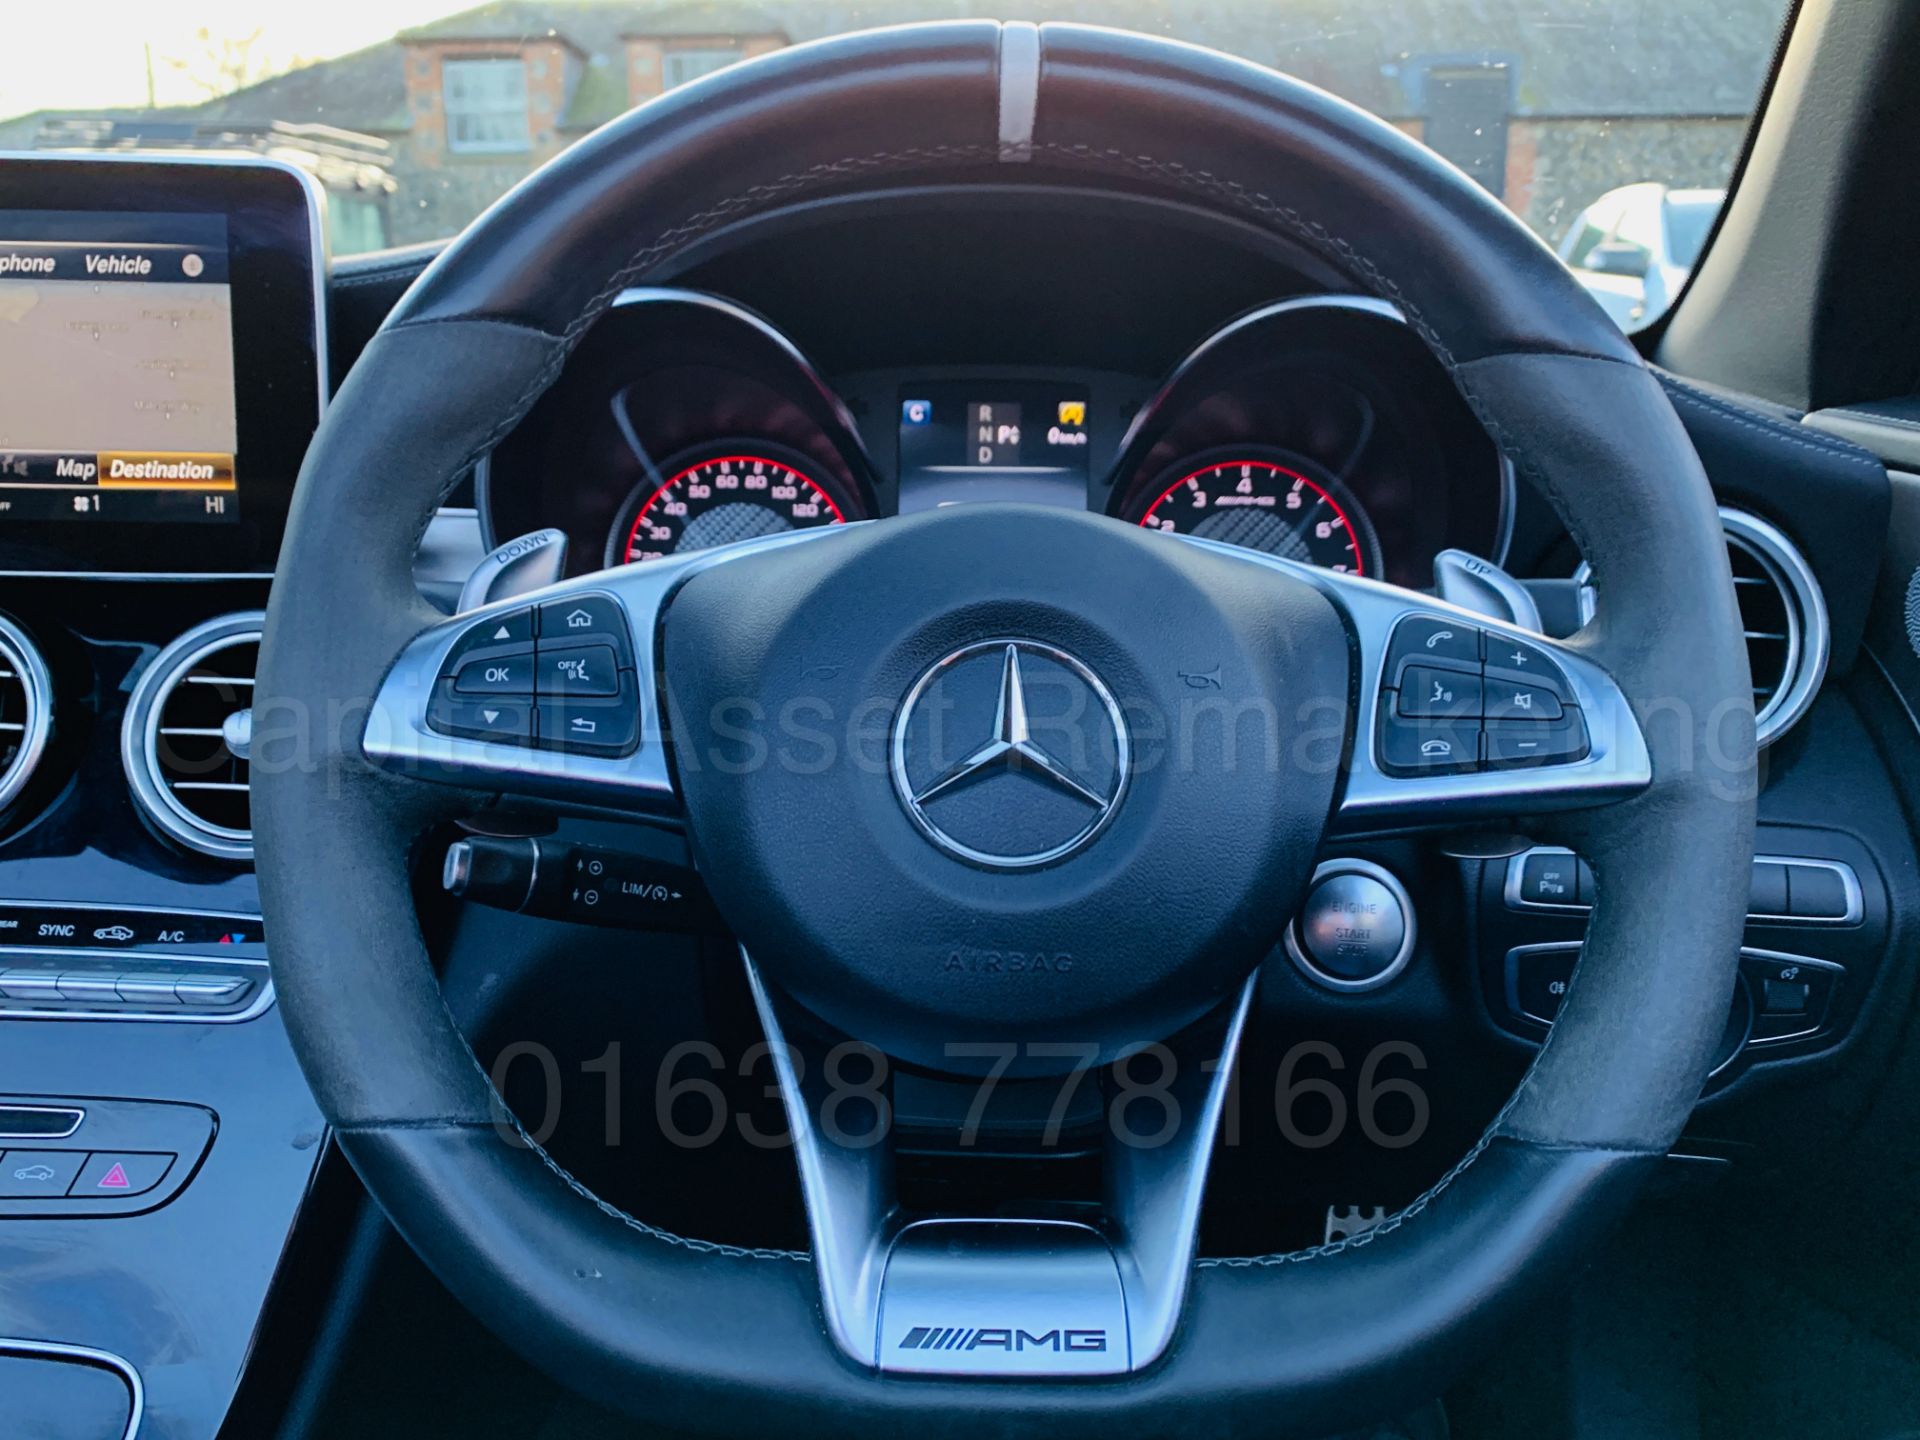 (On Sale) MERCEDES-BENZ AMG C63-S *CABRIOLET* (67 REG) '4.0 BI-TURBO -510 BHP - AUTO' *FULLY LOADED* - Image 75 of 79